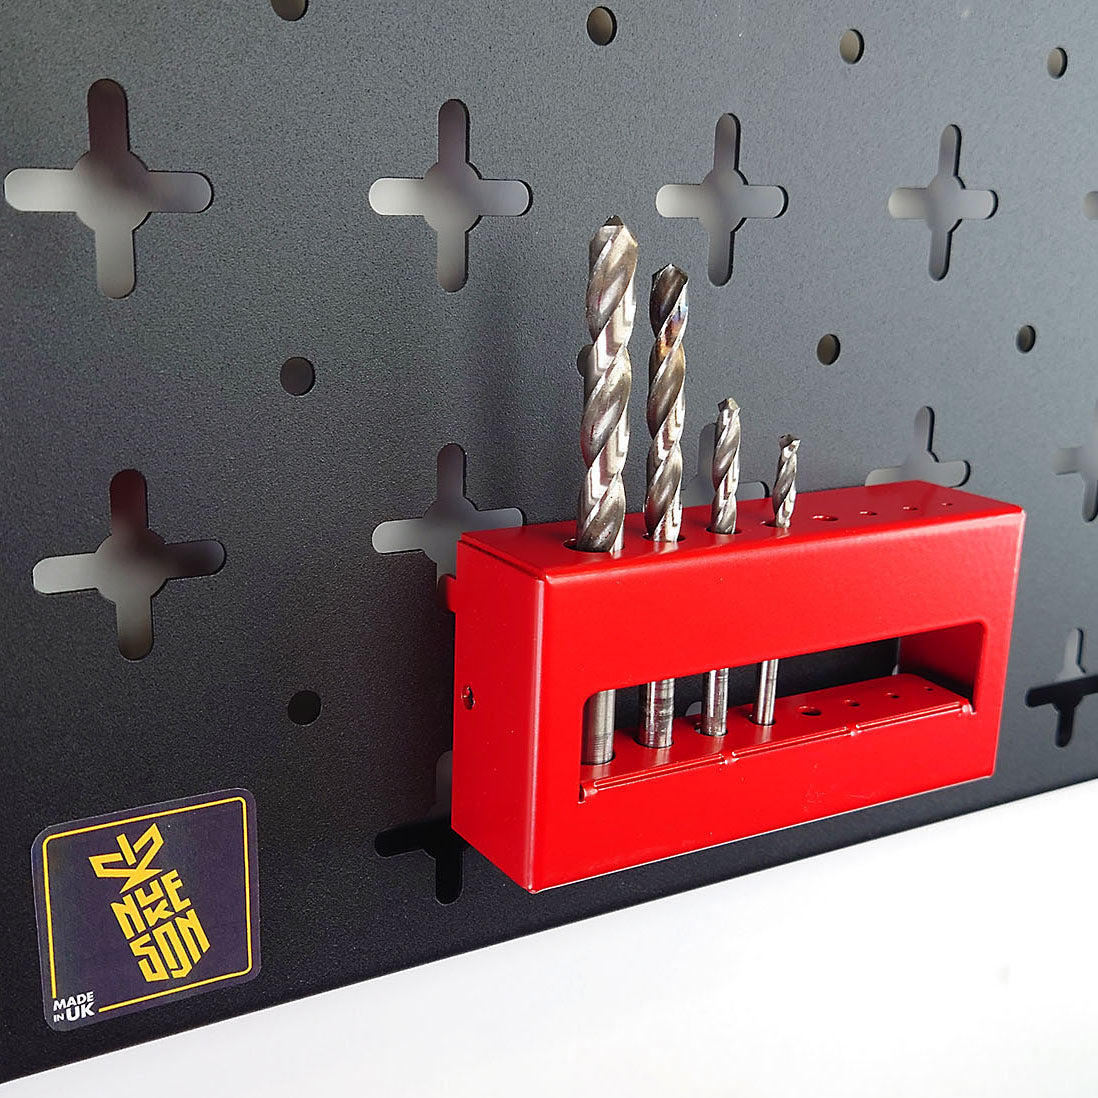 Nukeson Tool Wall - Drill Bit Holder Attachment - Indoor Outdoors